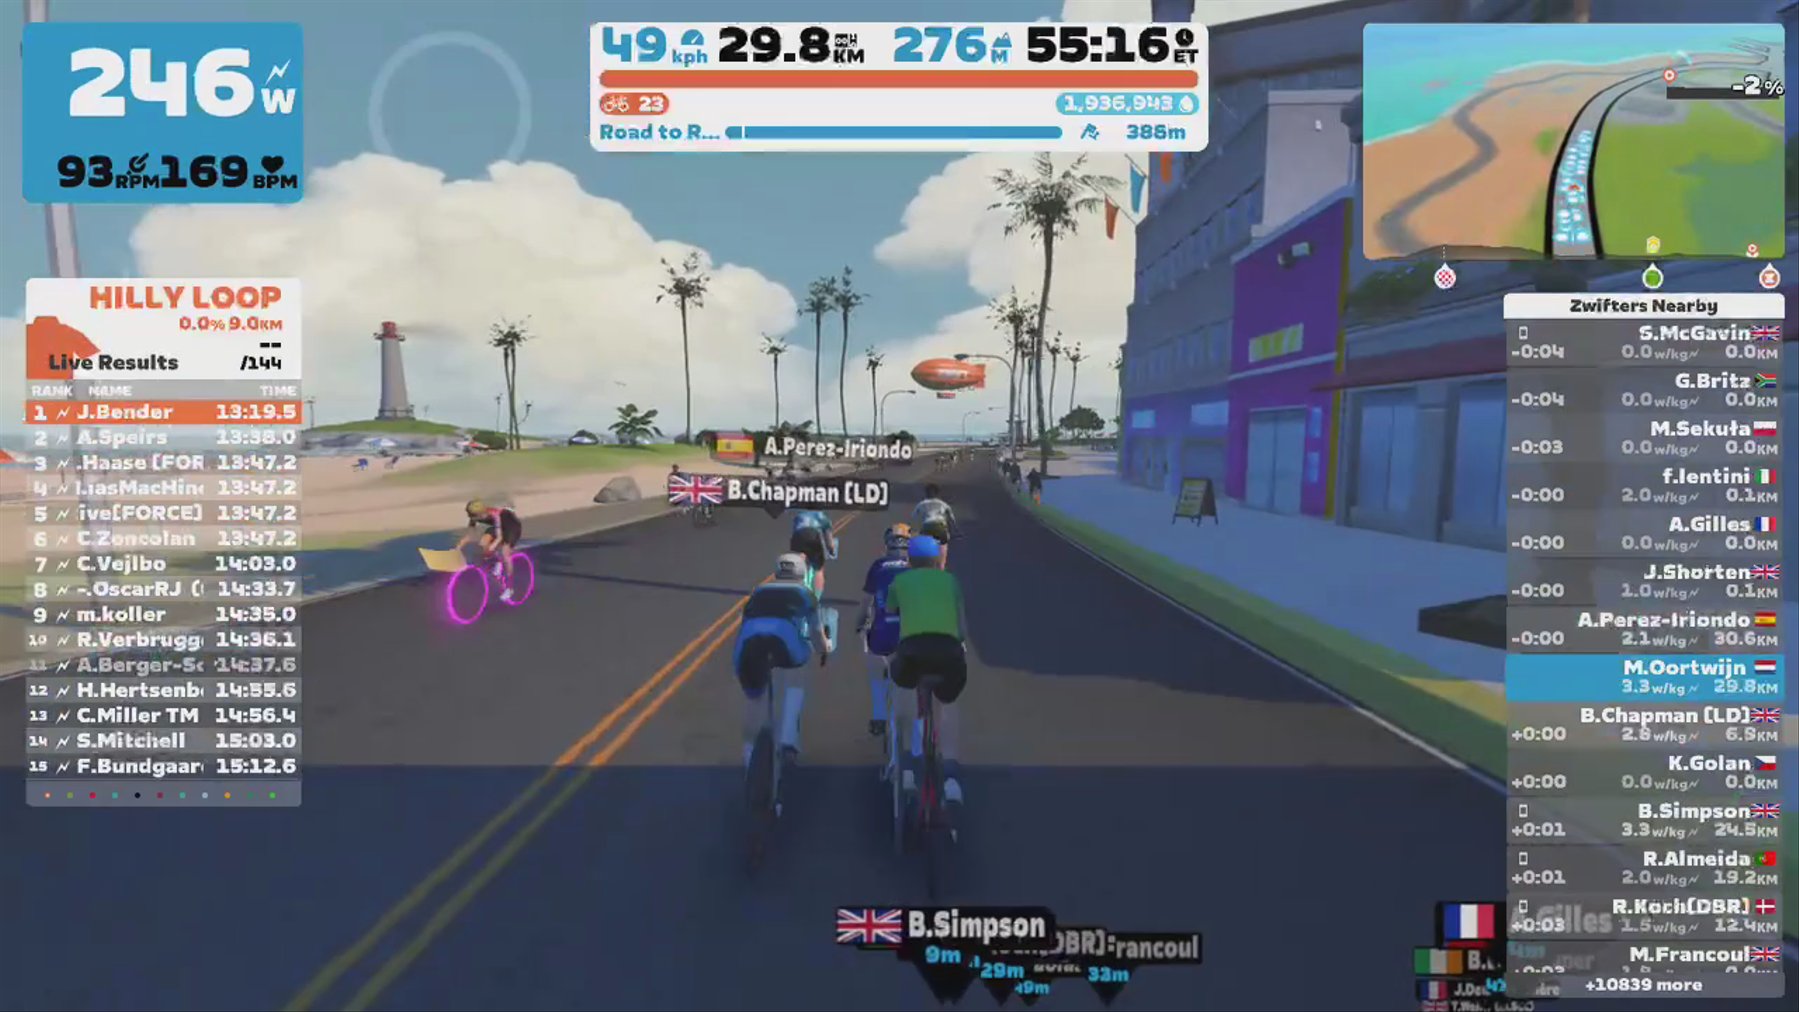 Zwift - Road to Ruins in Watopia